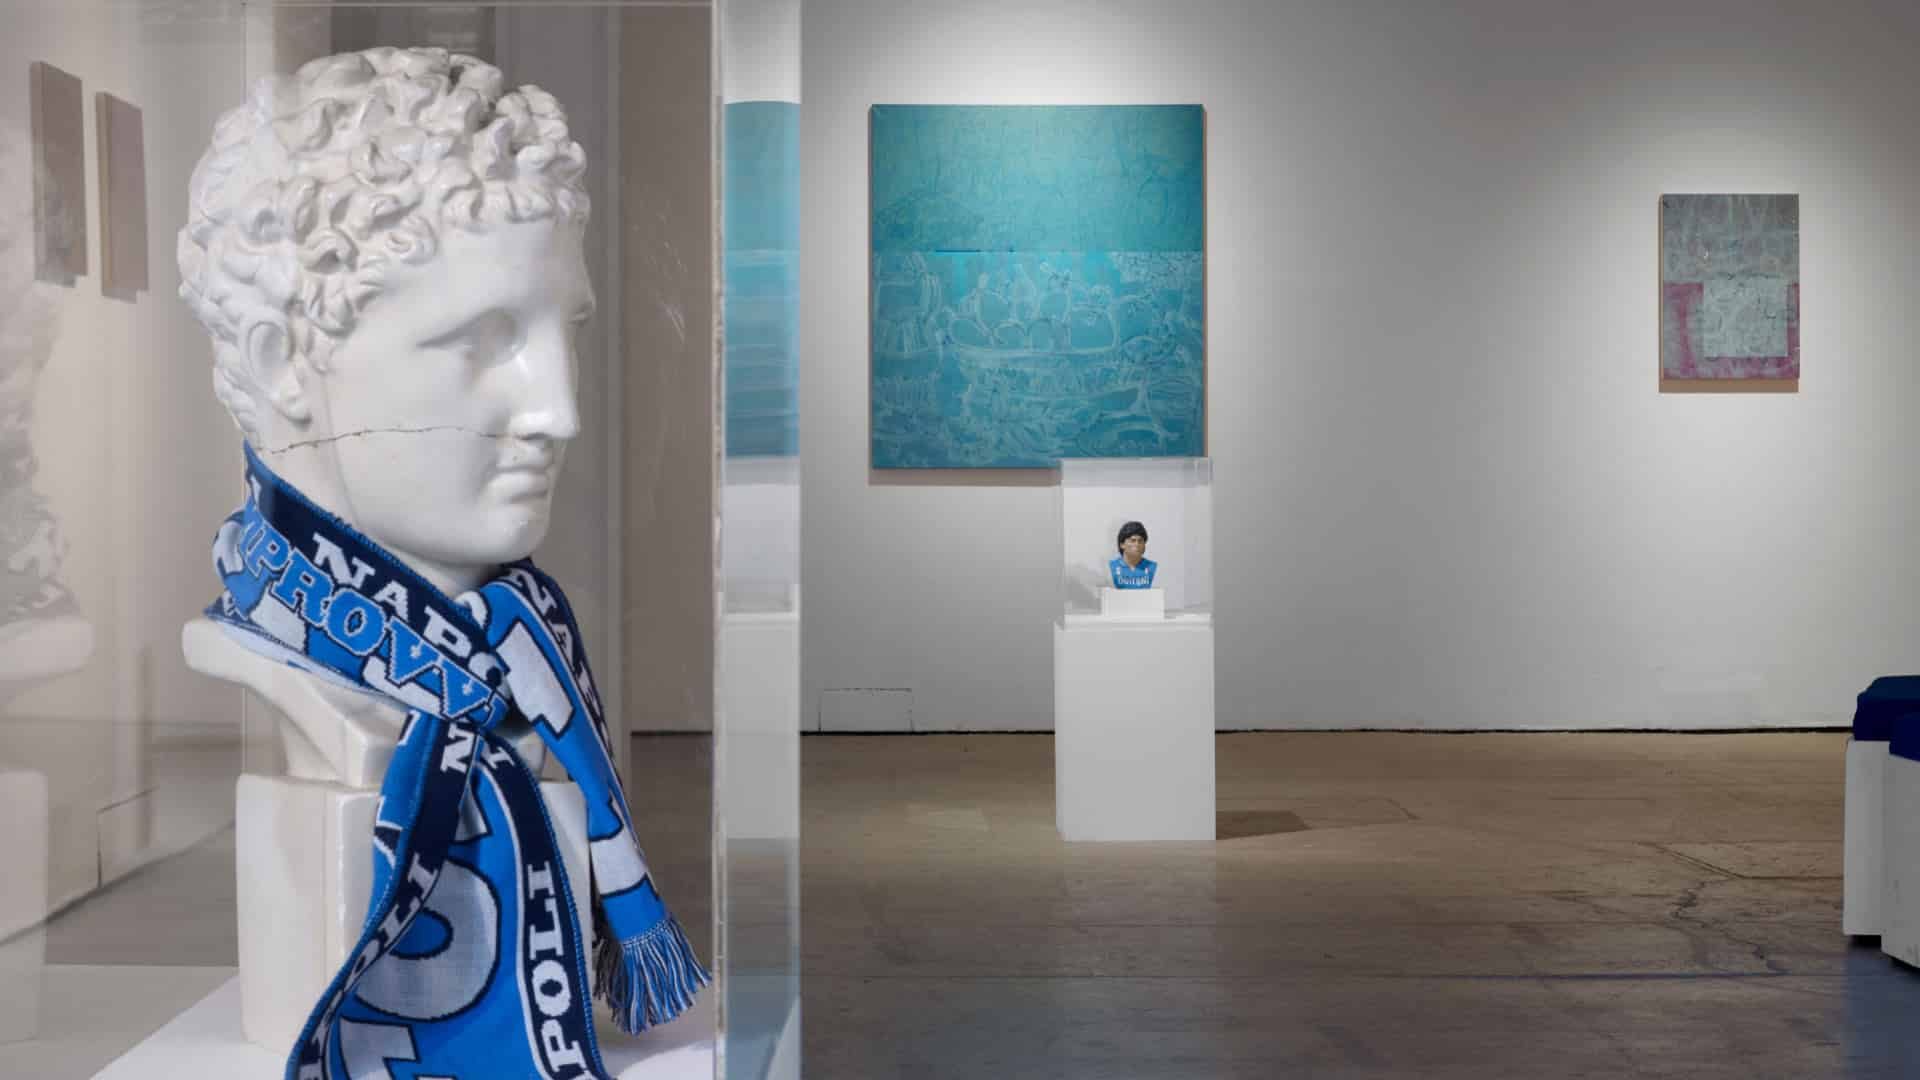 Alistair Woods' art at Castlefield Gallert featuring Napoli scarves and a bust of Diego Maradona